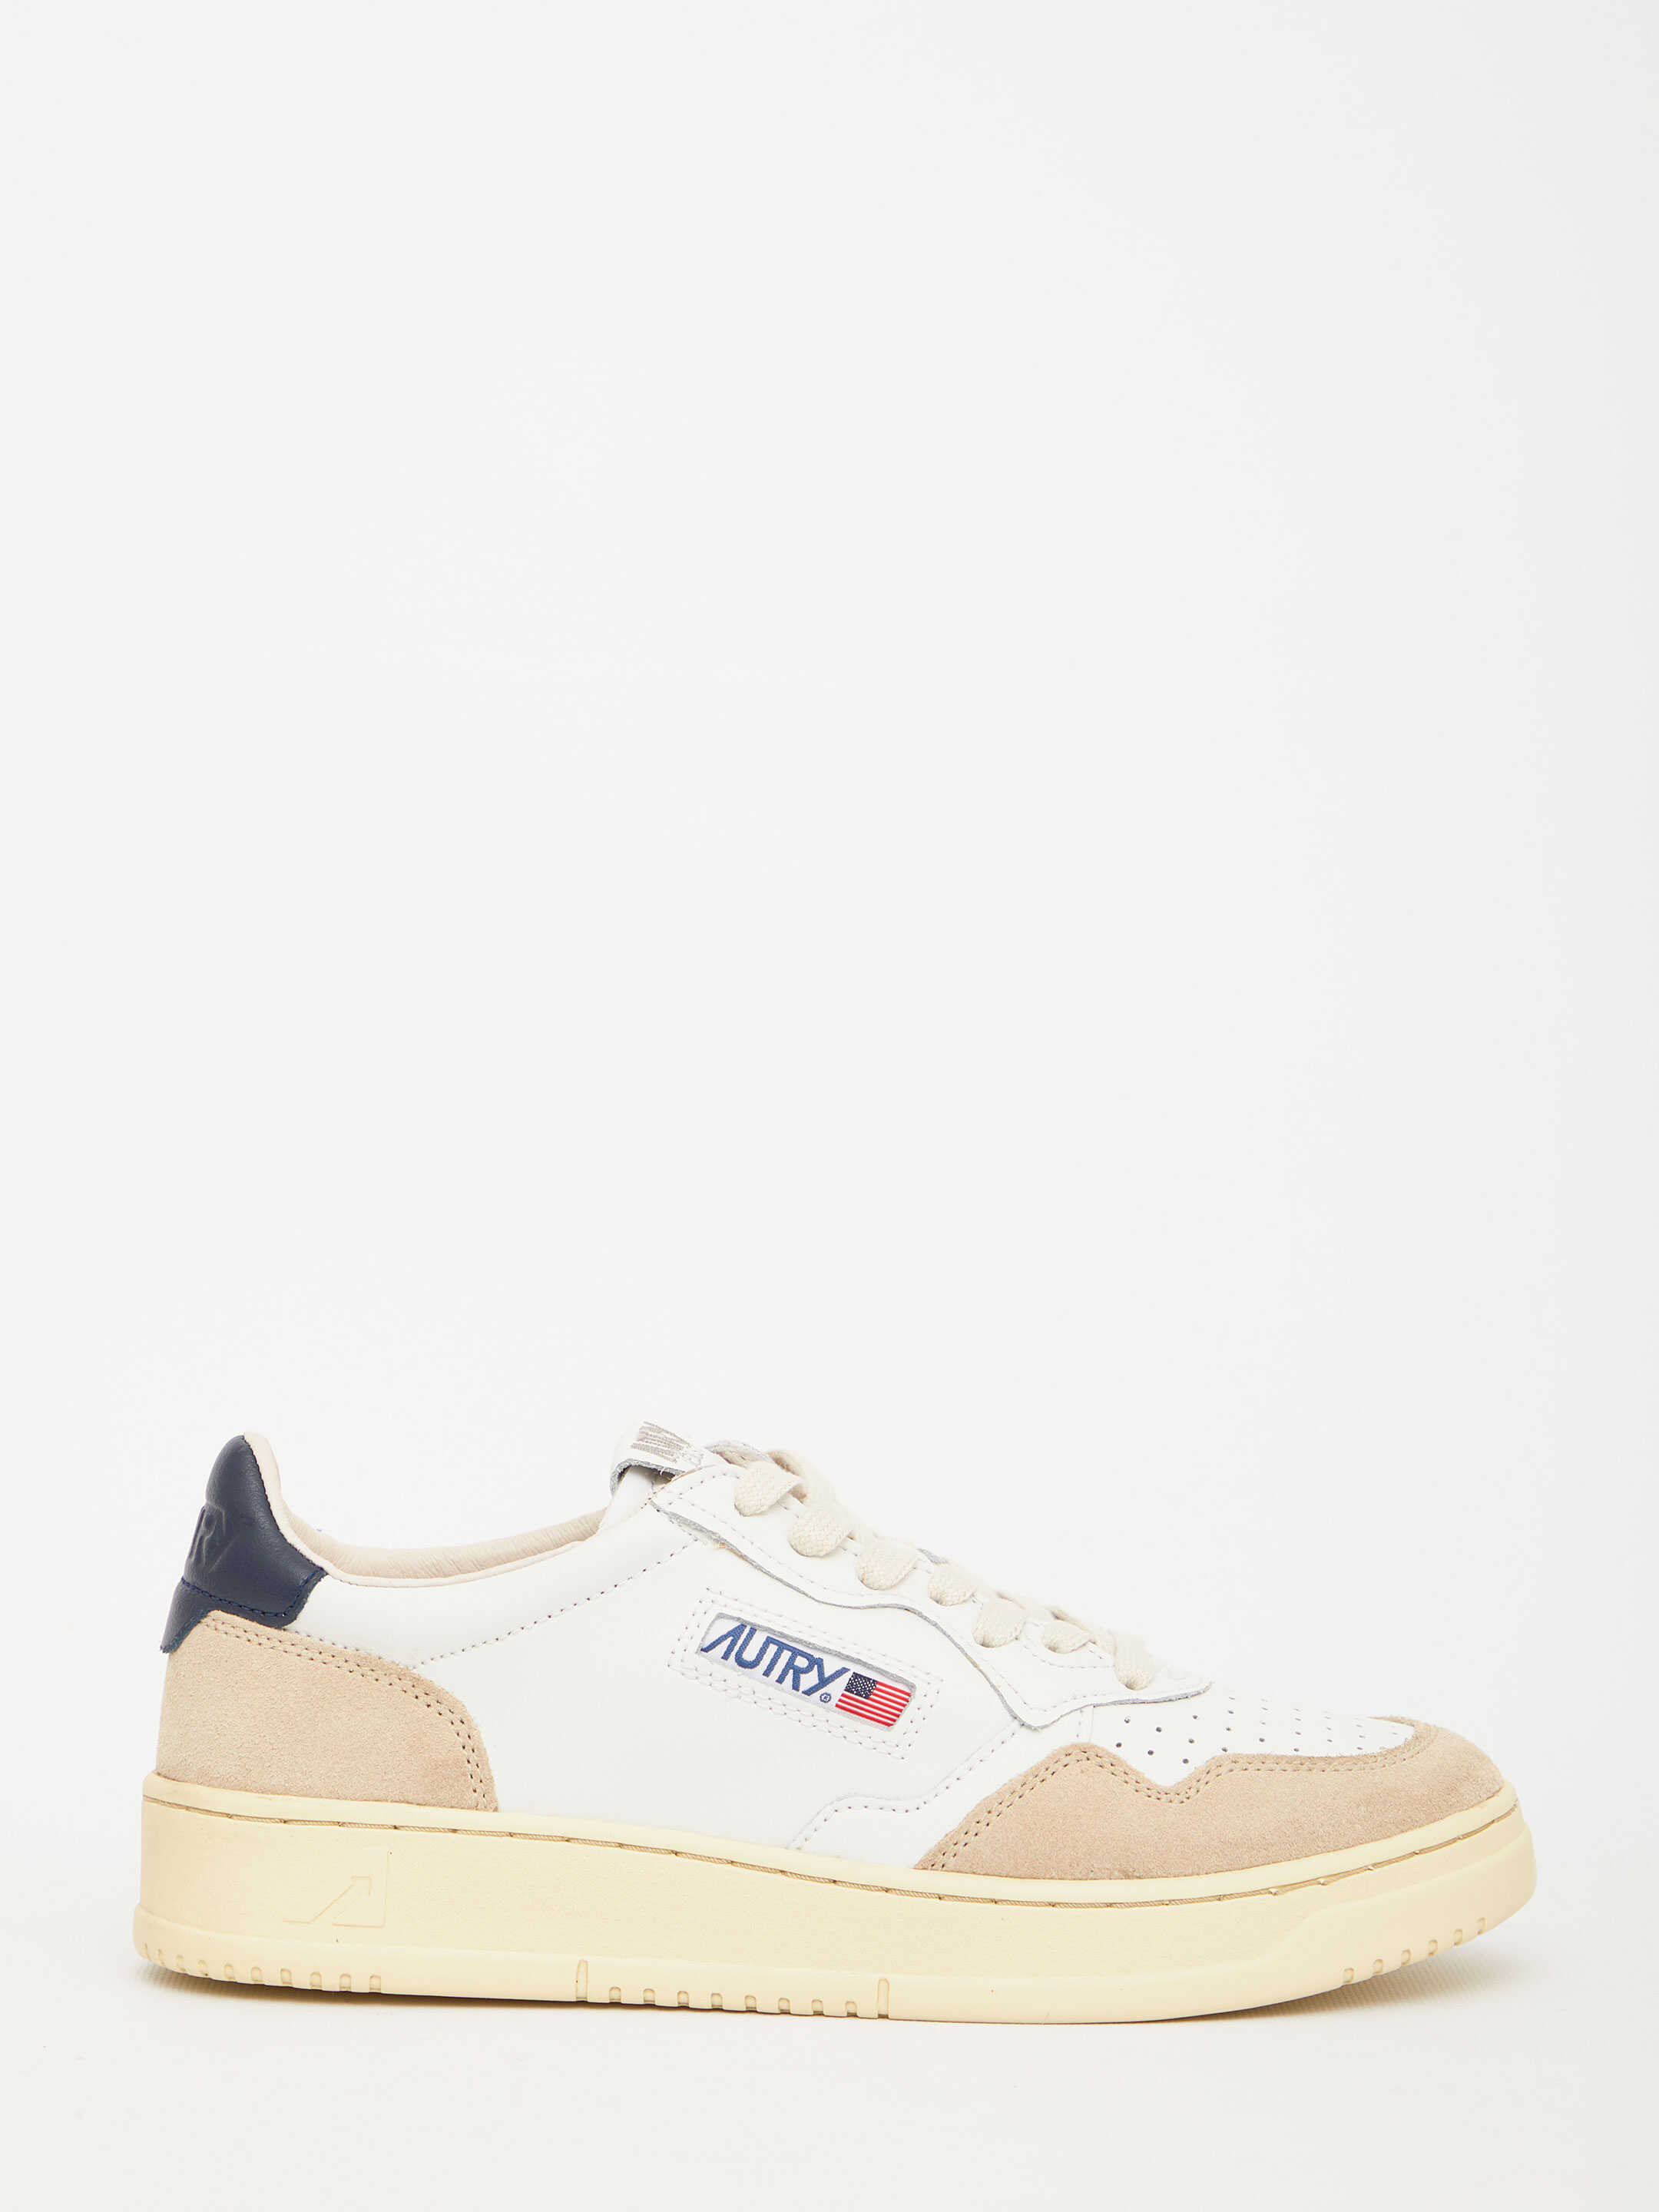 AUTRY Medalist Suede Sneakers WHITE image10